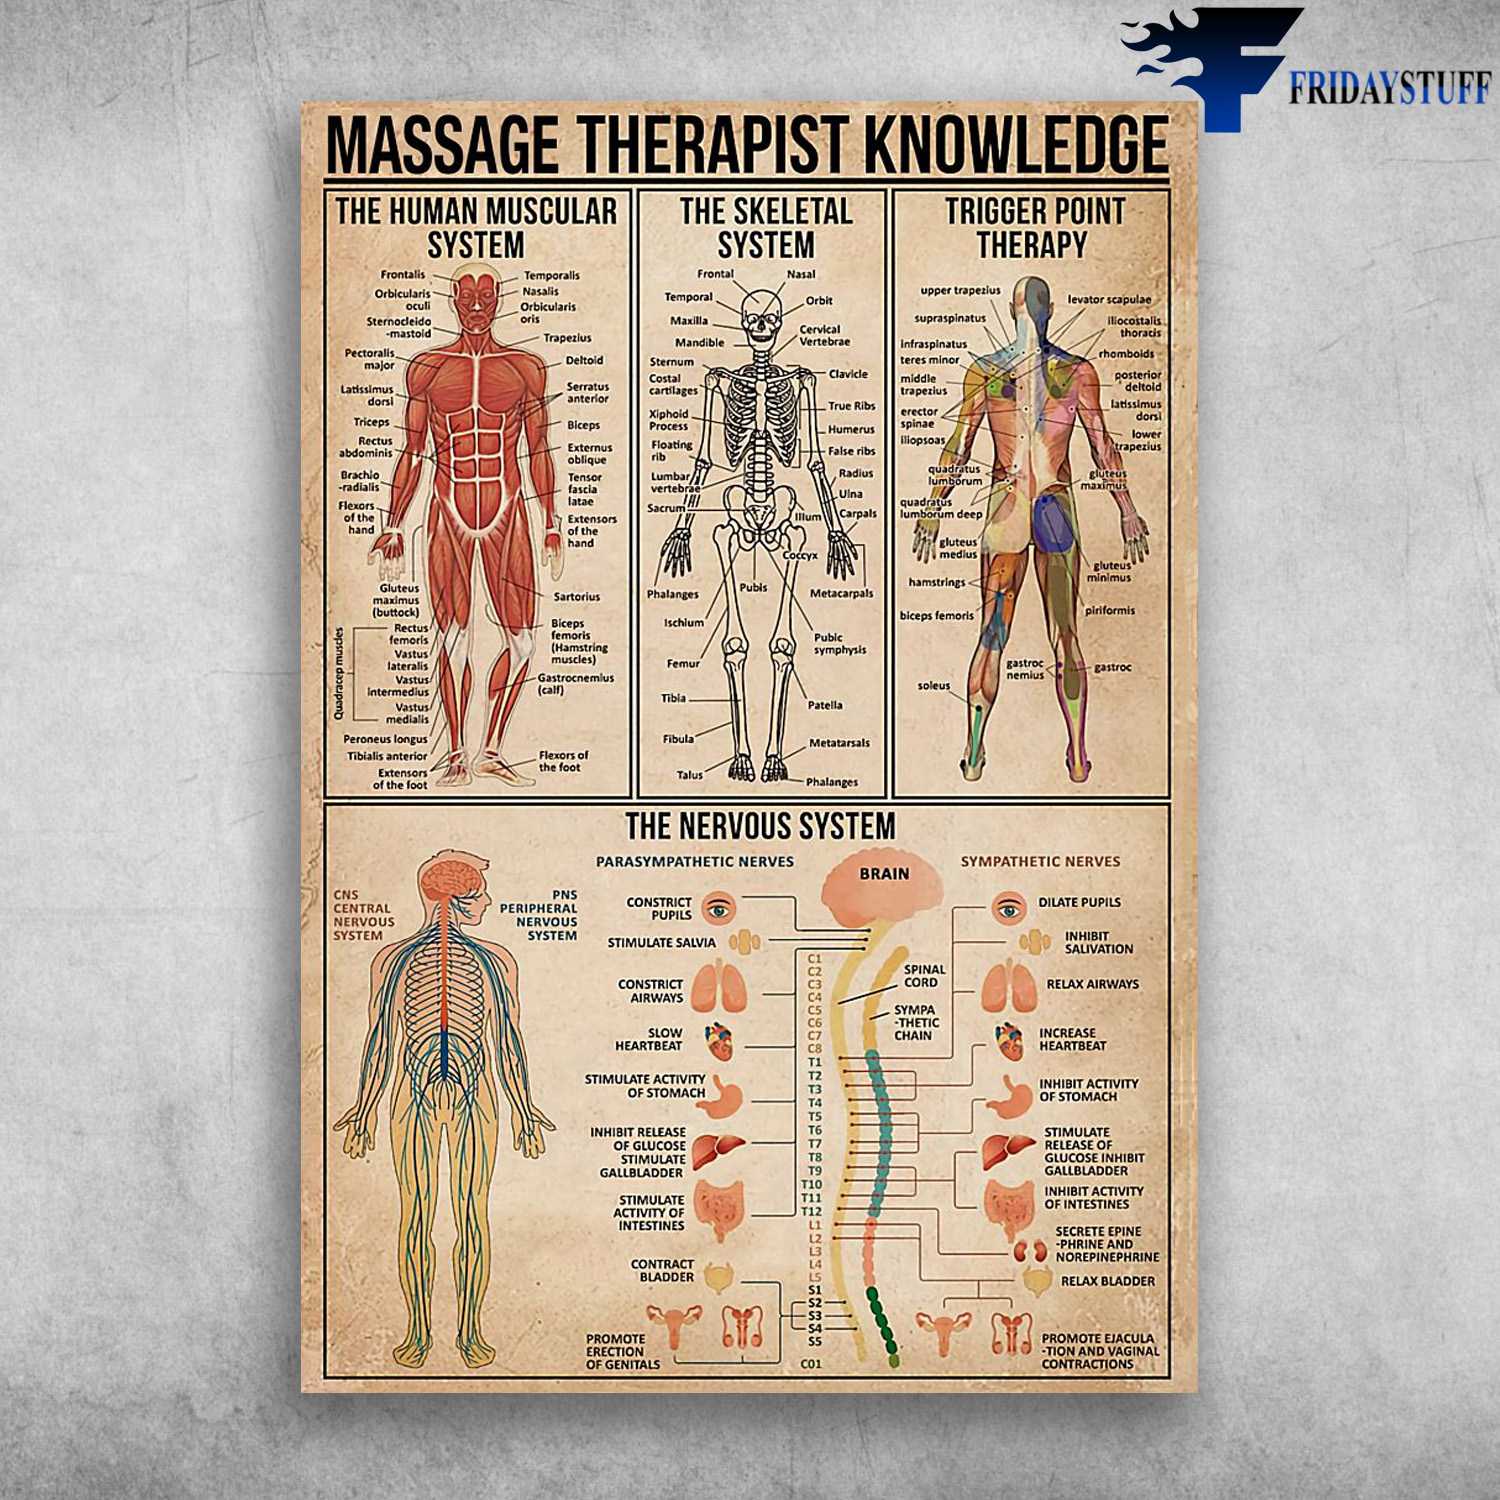 Massage Poster, Massage Therapist Knowledge, The Human Muscular System, The Skeletal System, Trigger Point Therapy